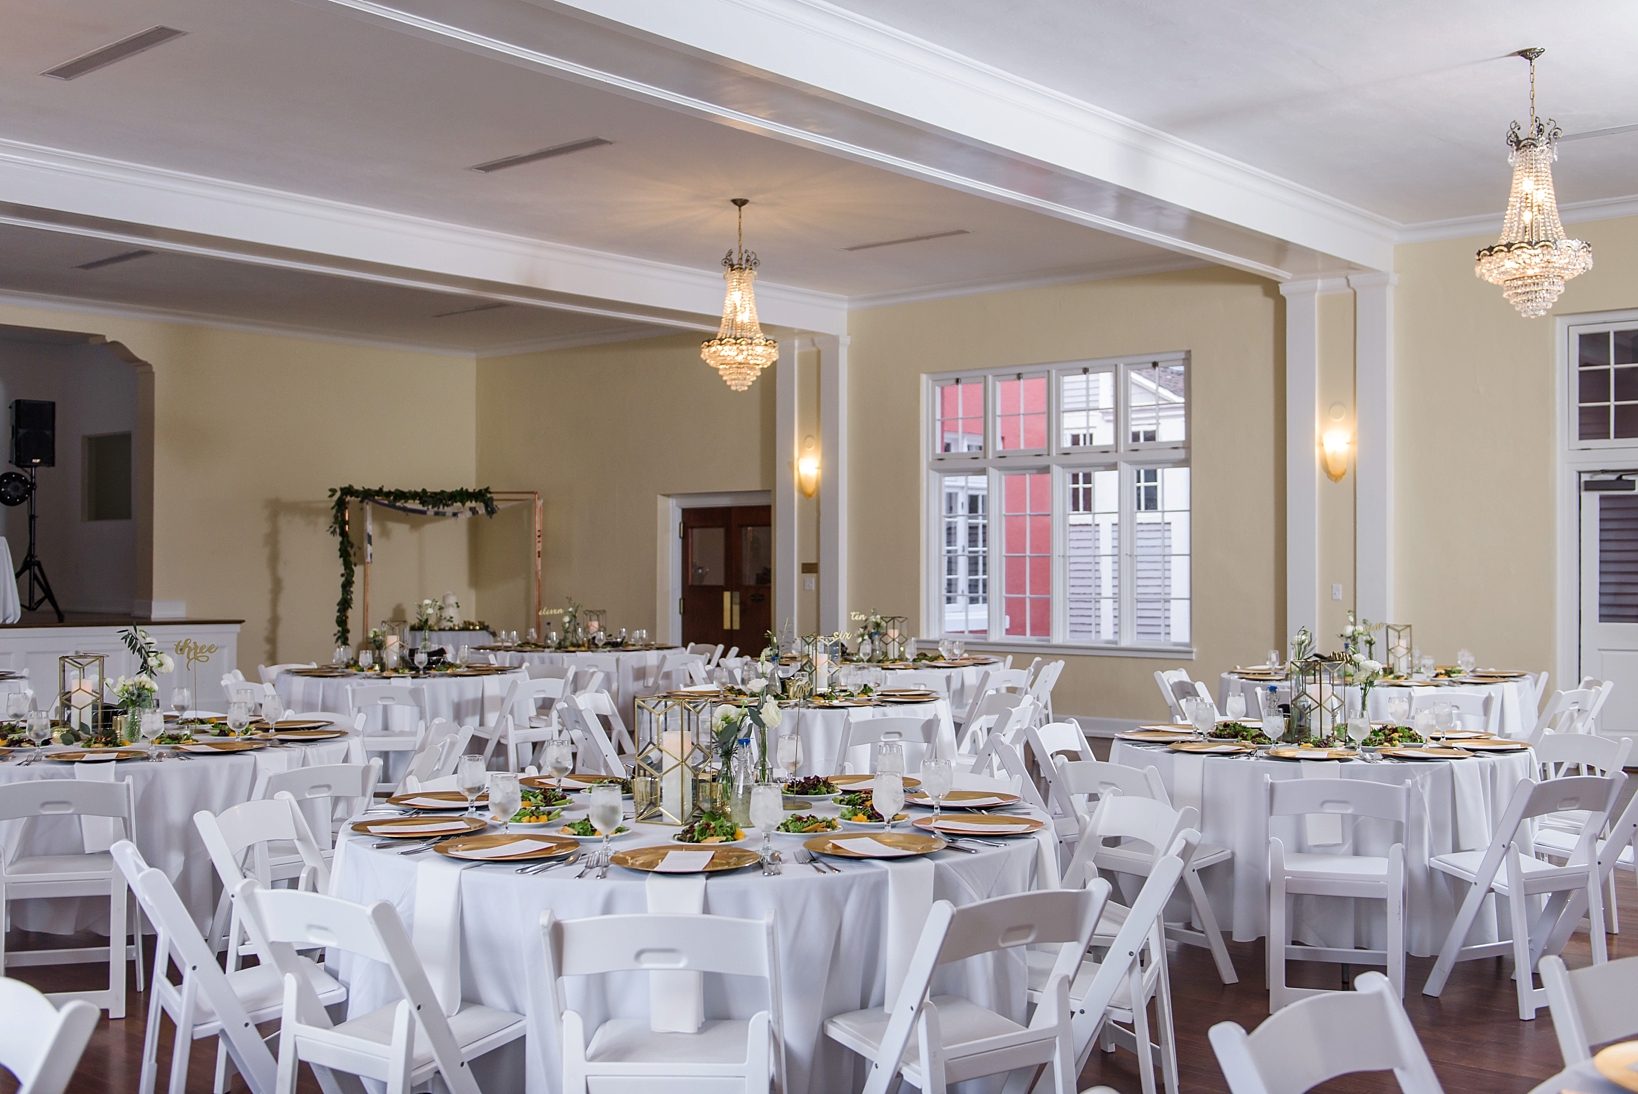 The wedding reception space with gold chargers and greenery accents